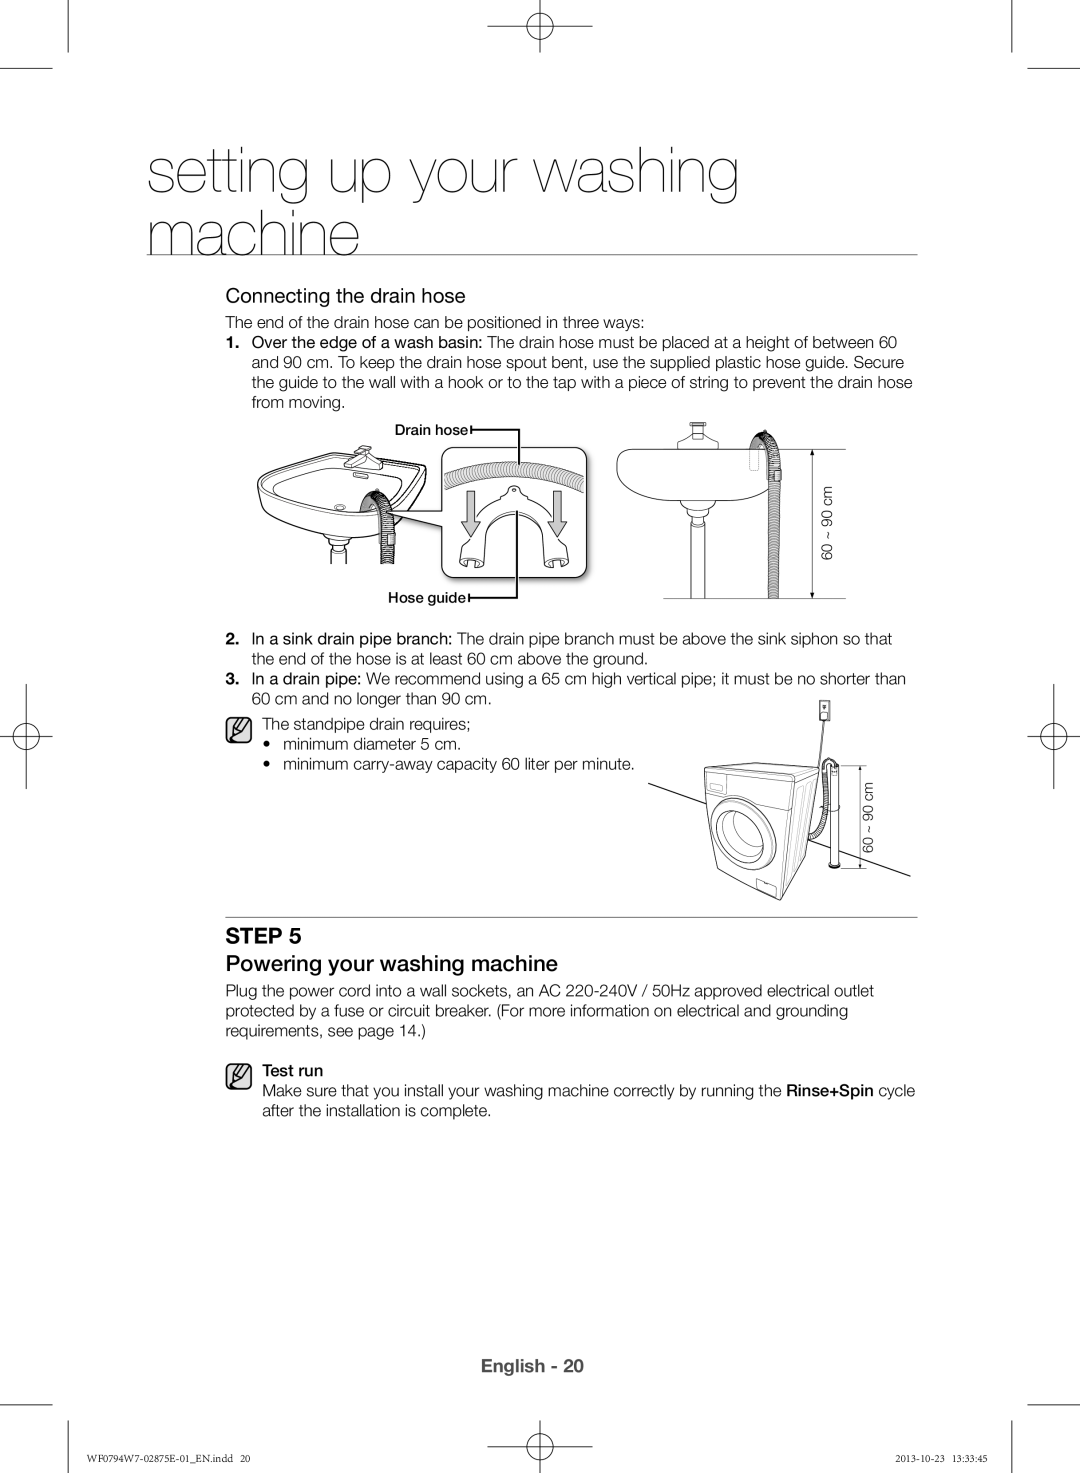 Samsung WF0794W7E9/XSV setting up your washing machine, Step, Powering your washing machine, Connecting the drain hose 